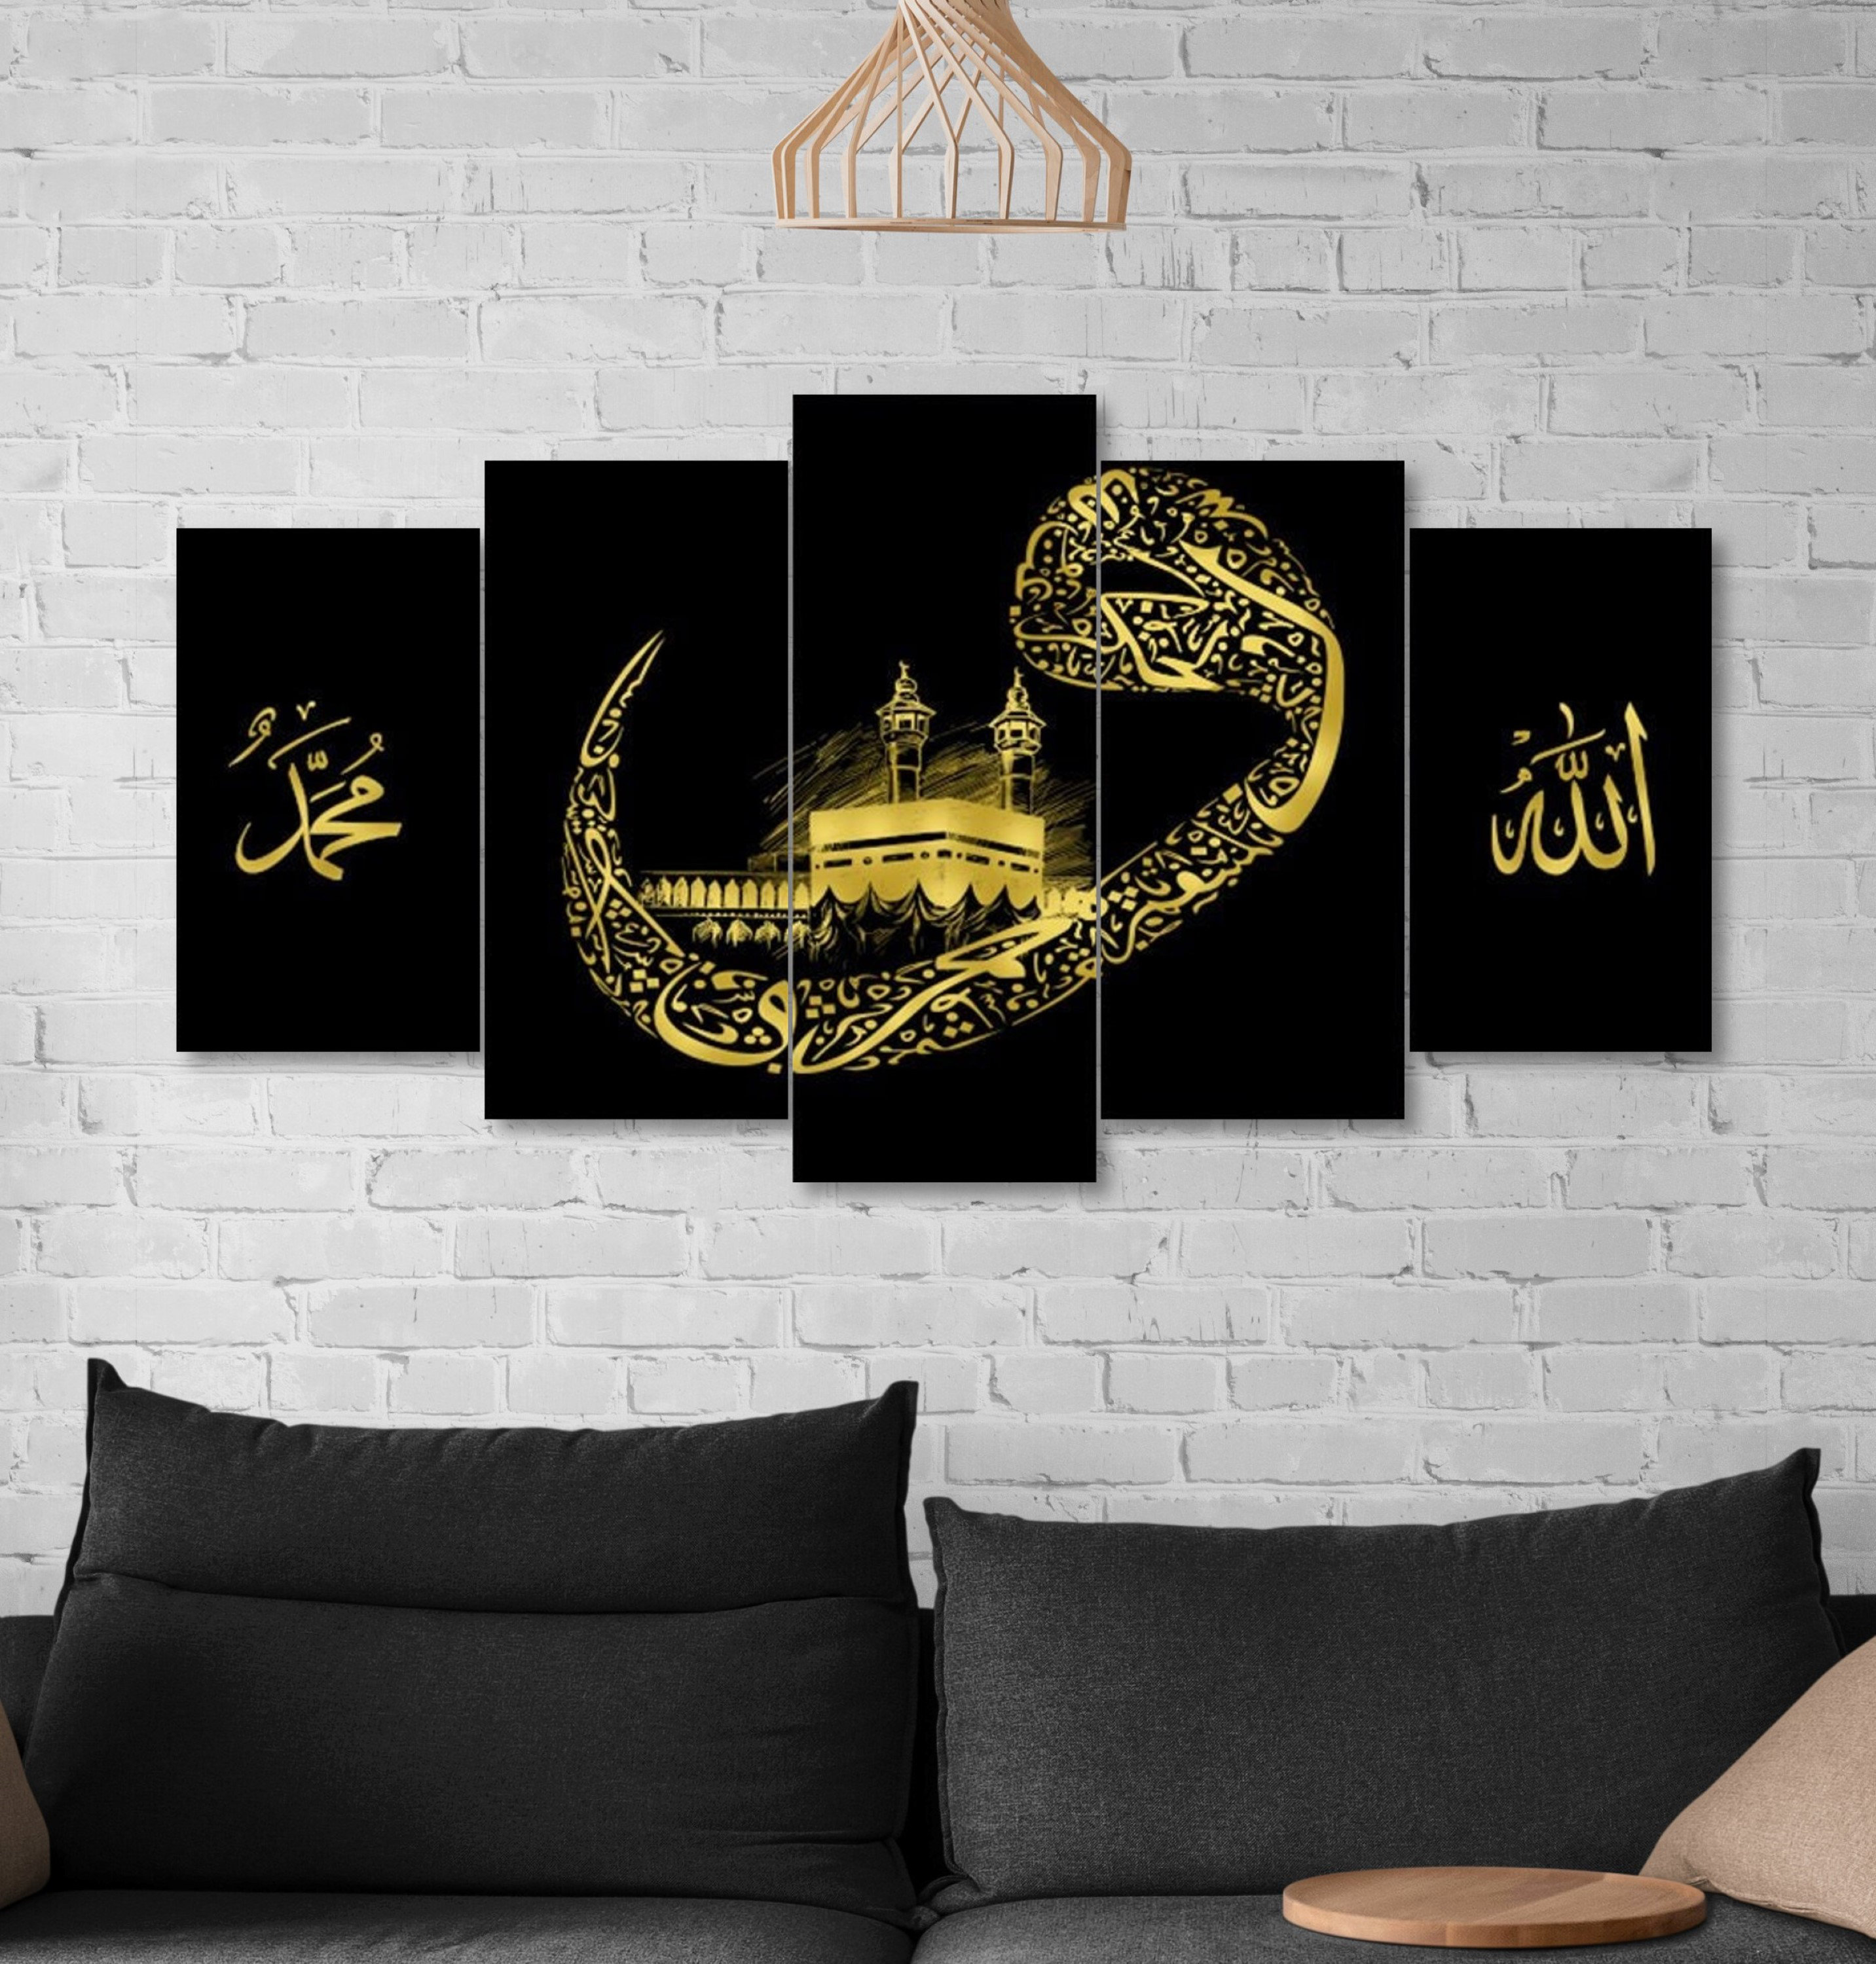 large allah muhammad islamic wall art decor on 5pcs canvas print with the waw calligraphy quranic art deco set muslim home decoration arabic calligraphy from quran for eid gift ramadan decoration or muslim wedding gift on canvas 5 pieces arabic calligraphy islamic canvas print